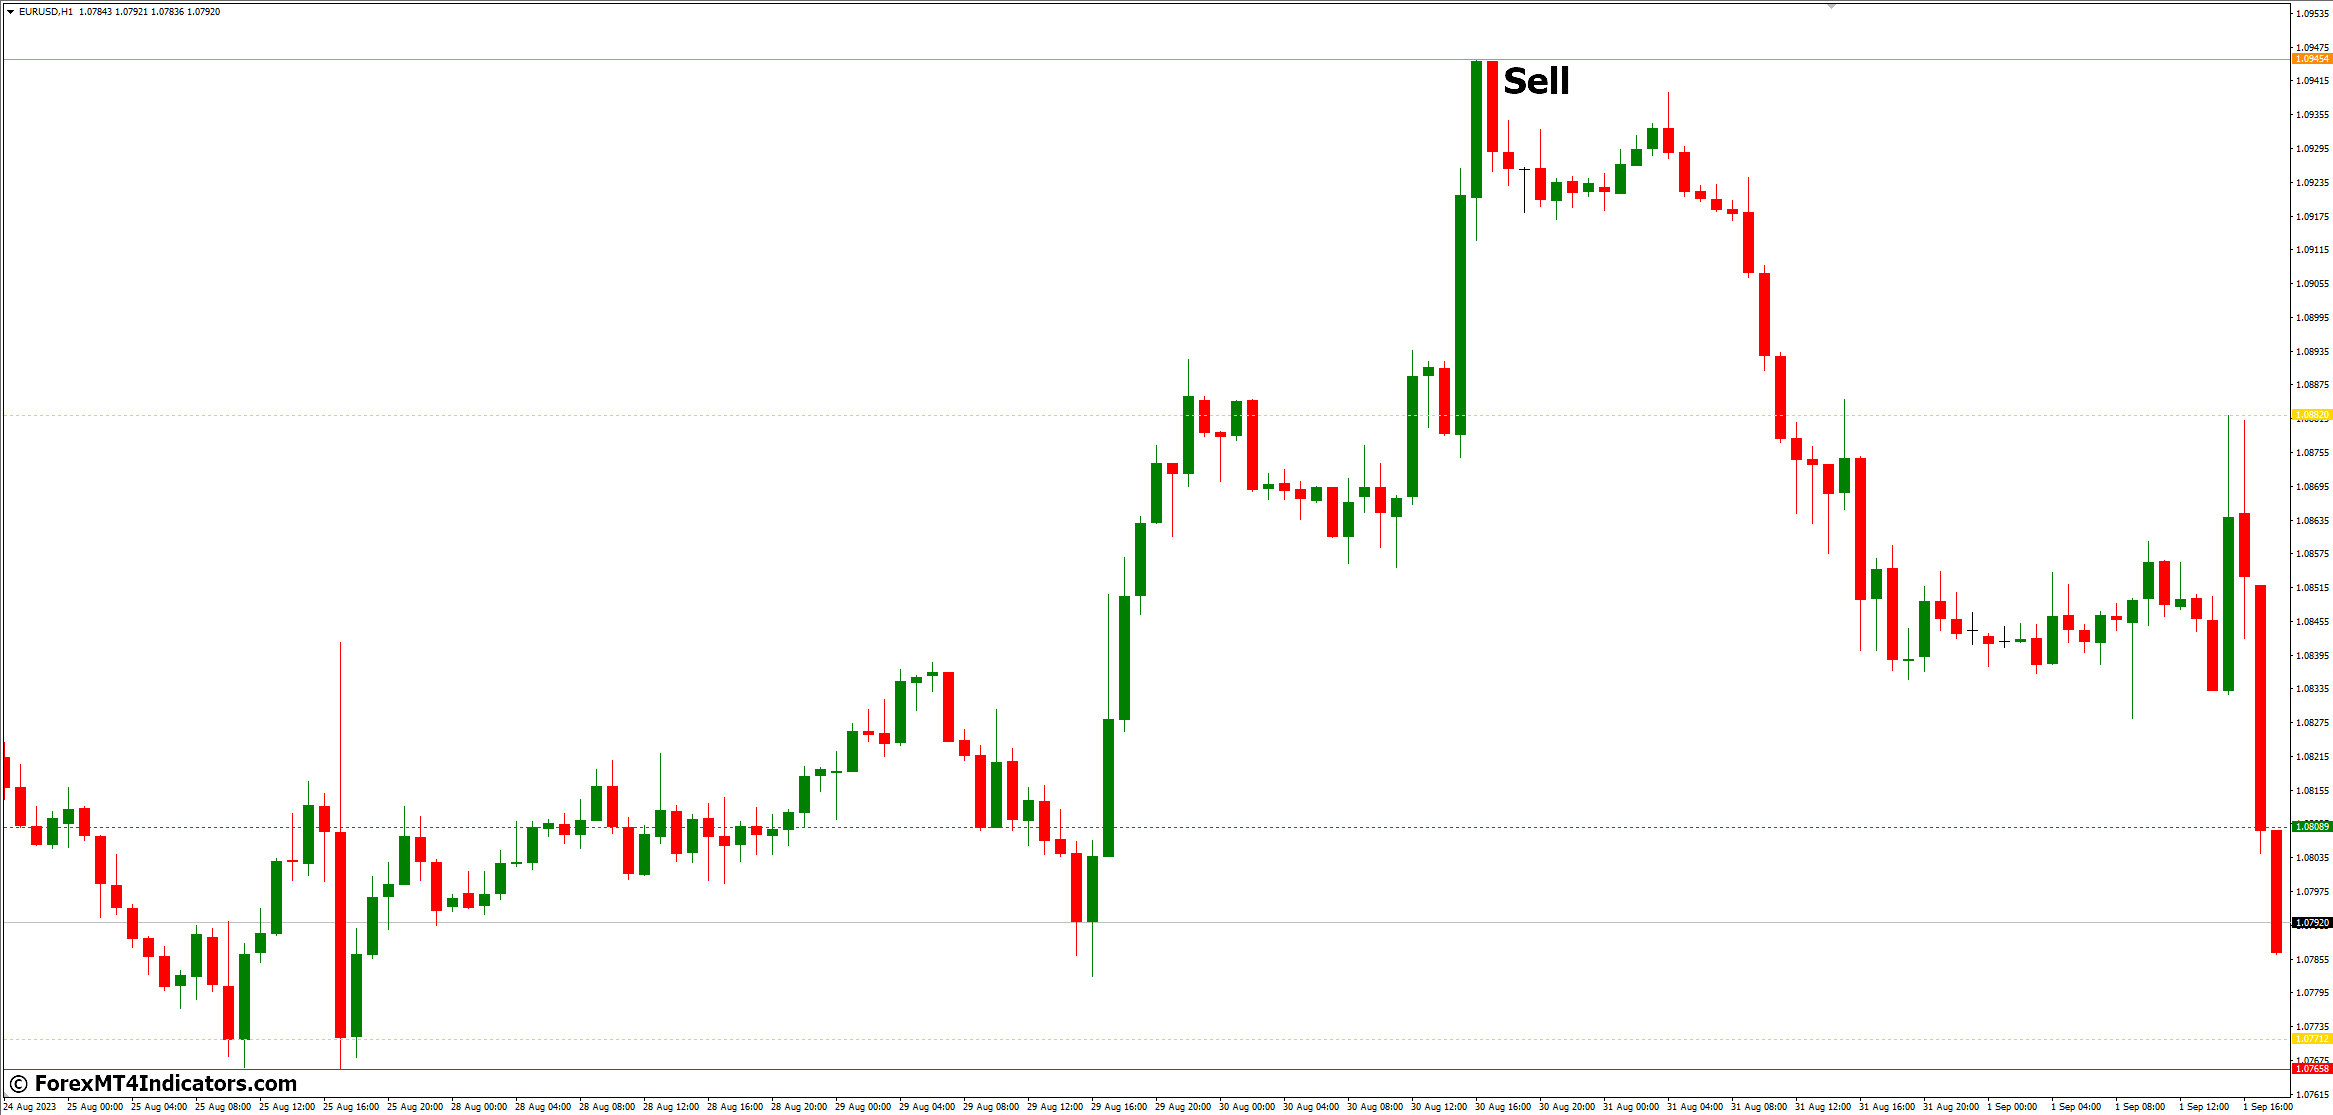 How to Trade with Fractal Support and Resistance MT4 Indicator - Sell Entry